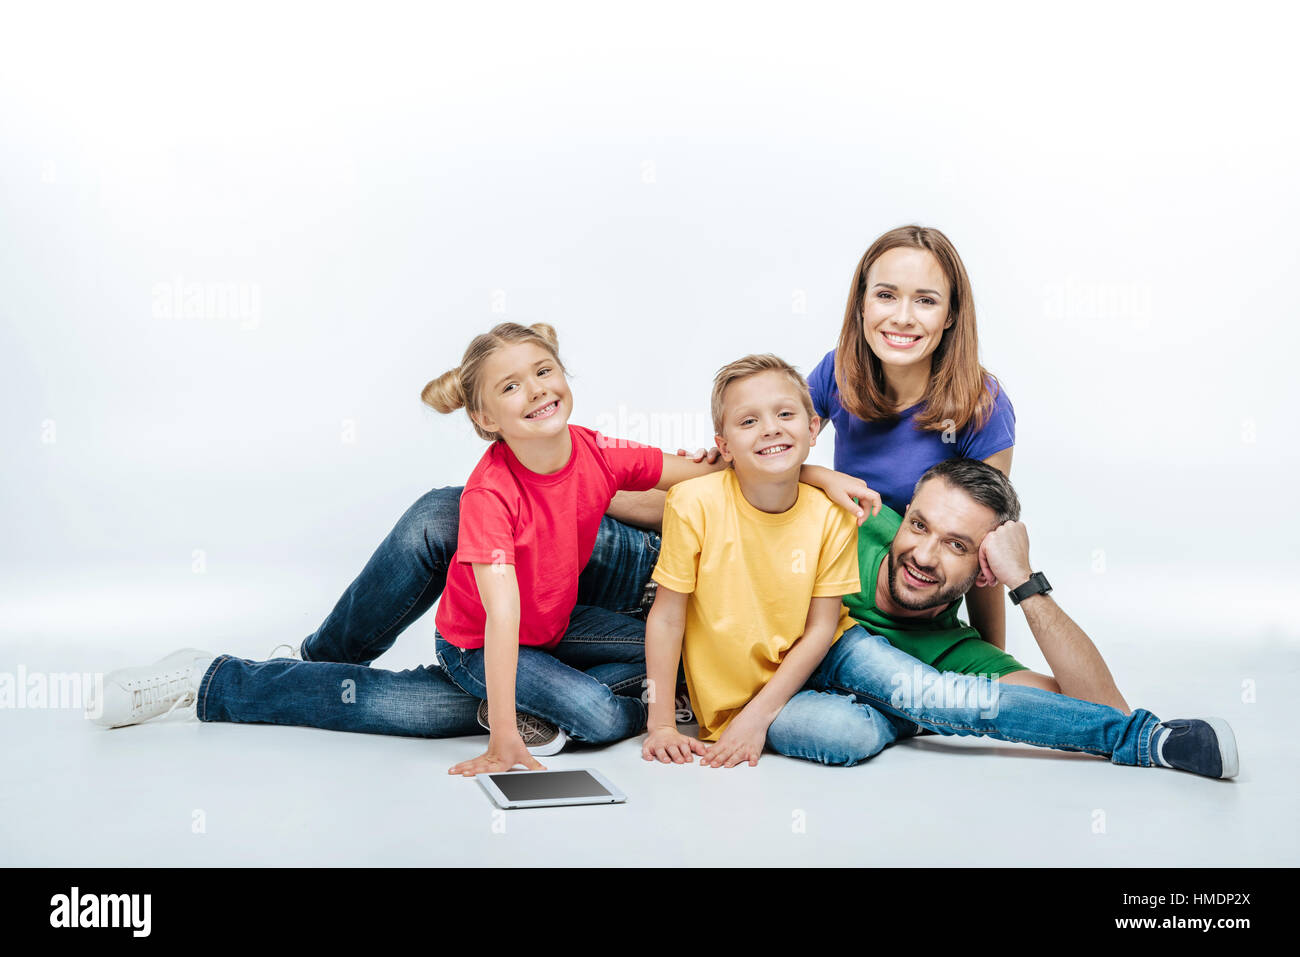 family lying together with digital tablet Stock Photo